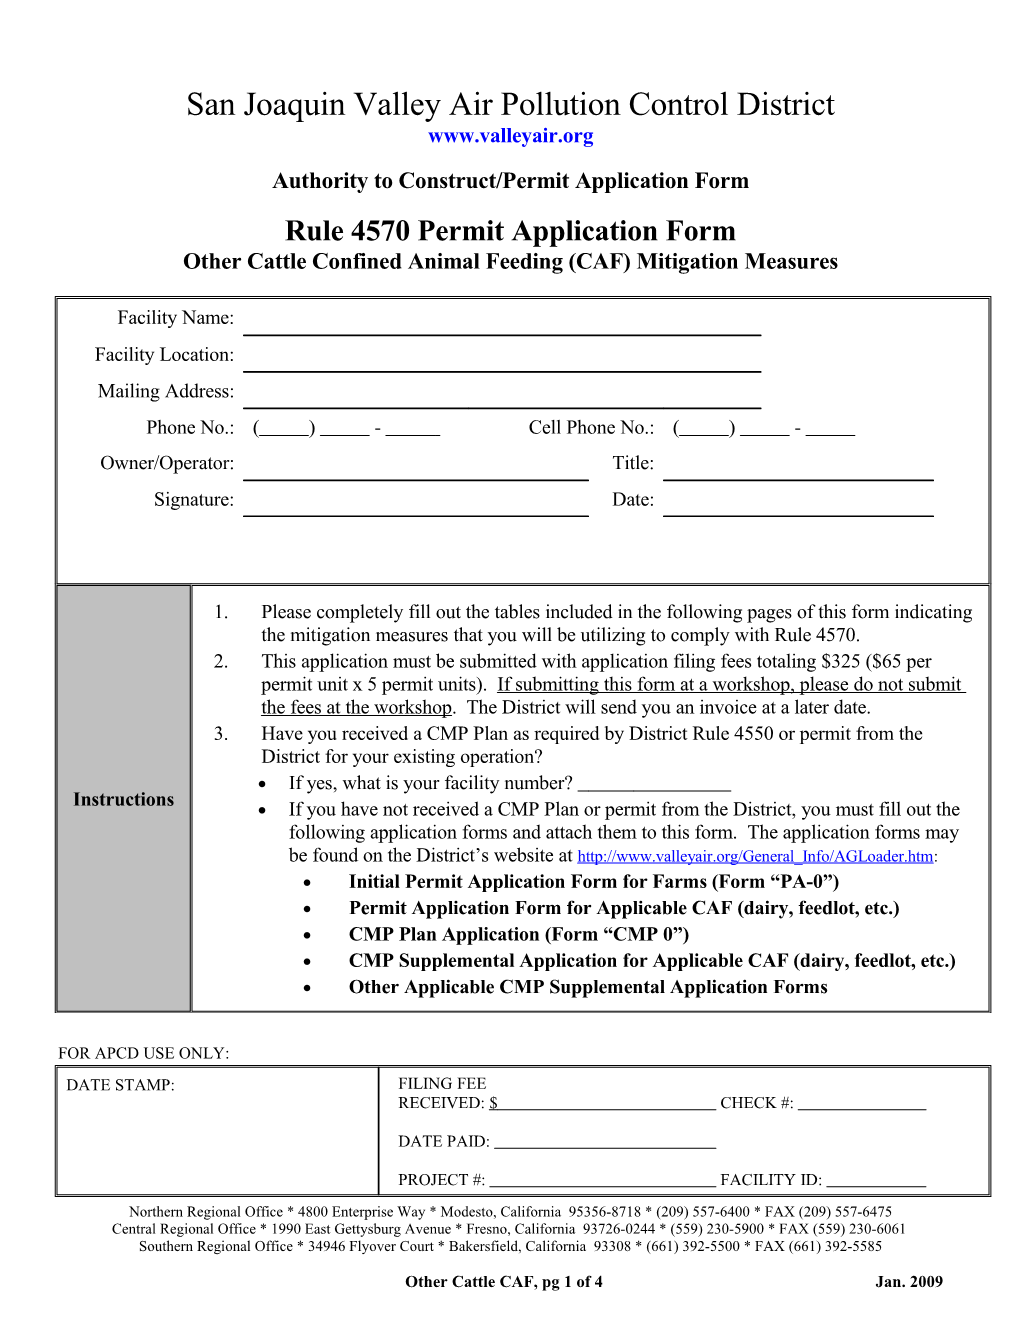 Other Cattle CAF Application